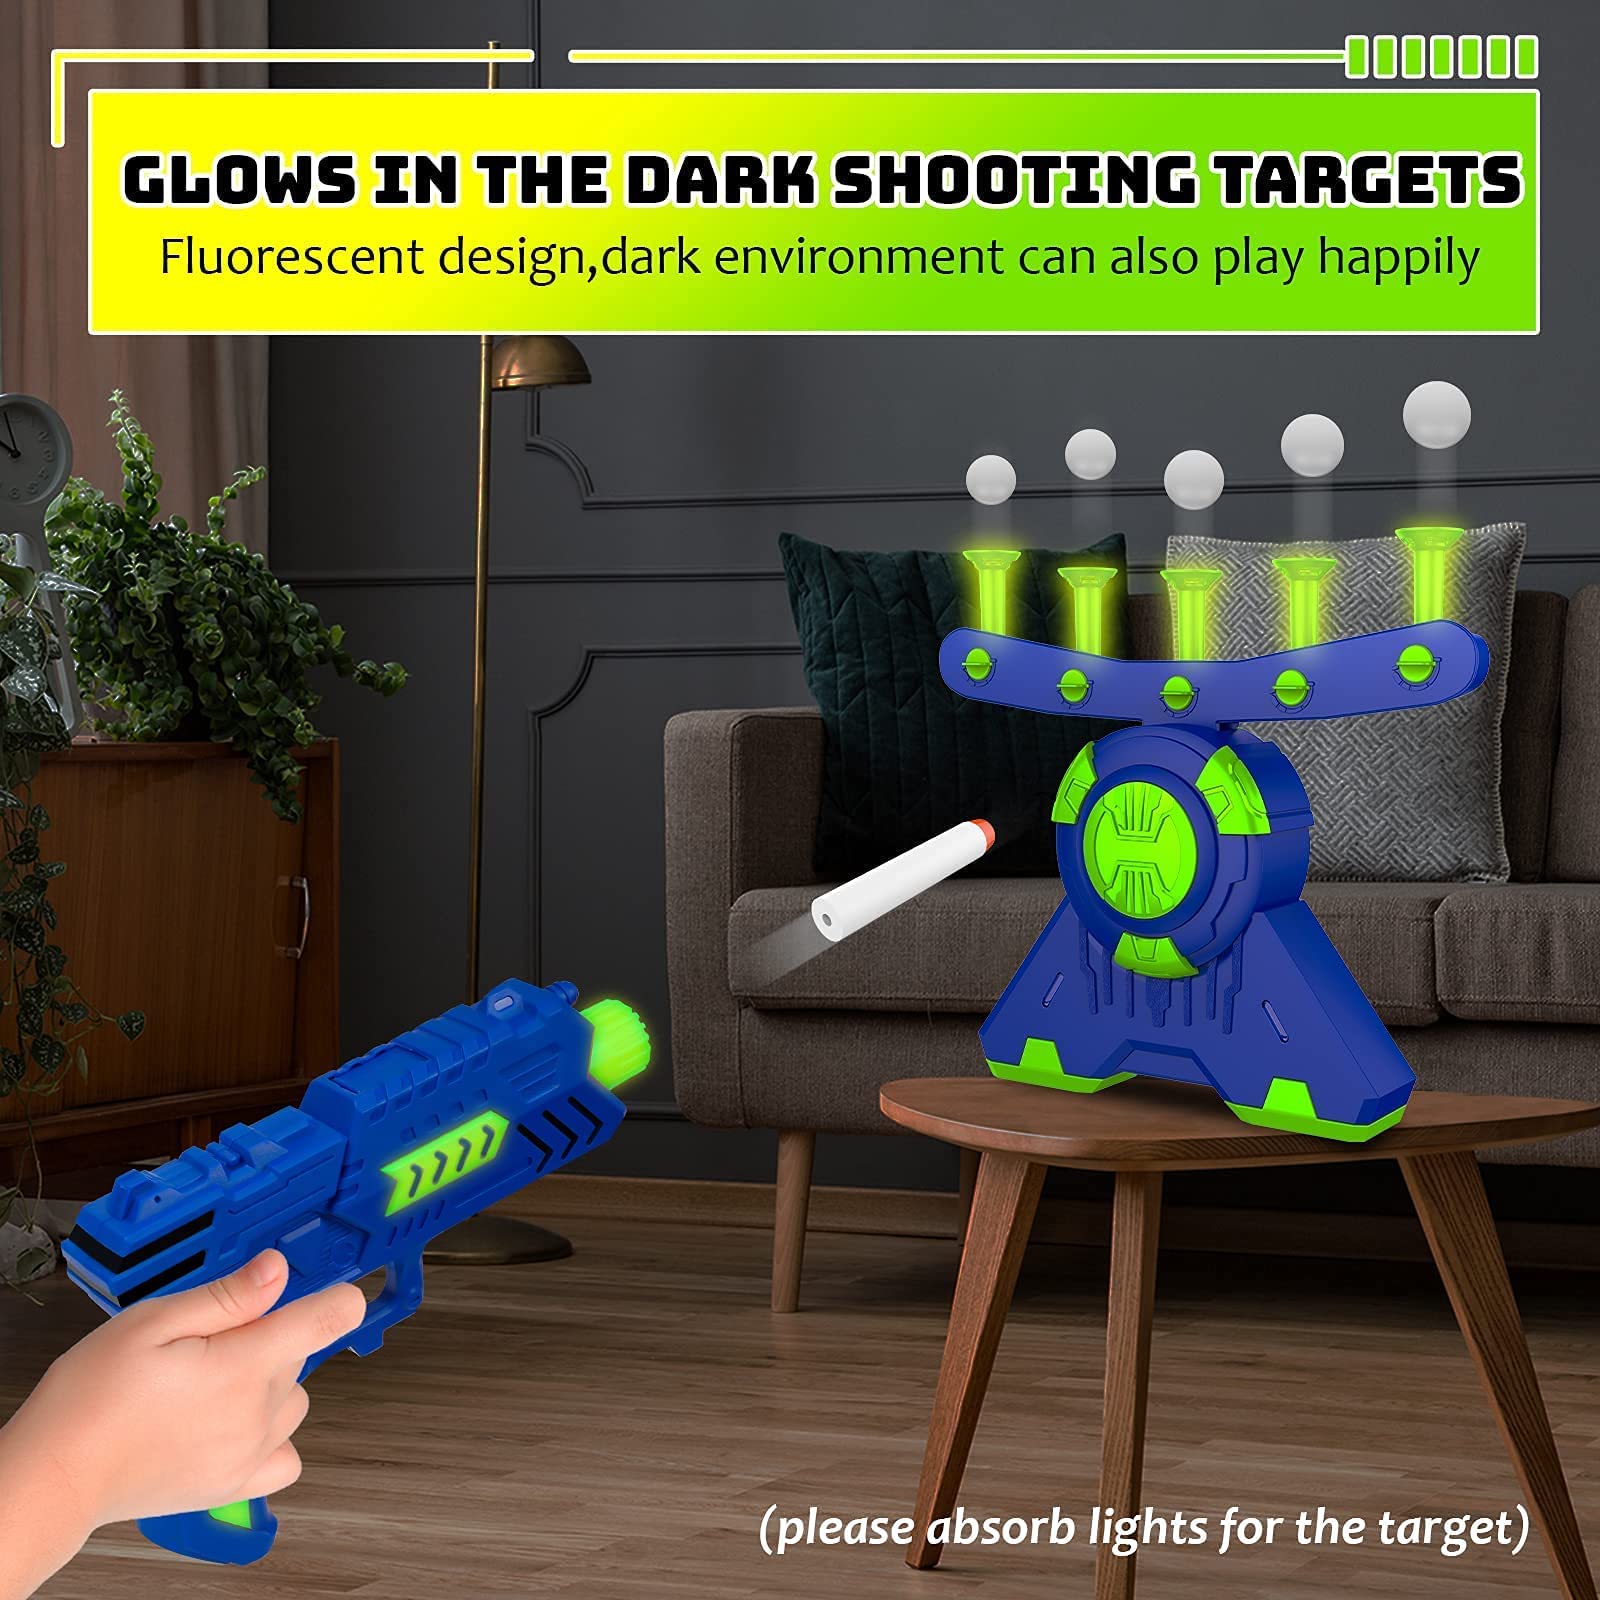 Shooting Games Toy Gift for Age 4, 5, 6, 7, 8, 9, 10+ Years Old Kids, Glow in The Dark Boy Toy Floating Ball Targets with Foam Dart Toy Blaster, 10 Balls 5 Targets, Compatible with Nerf Toy Blaster